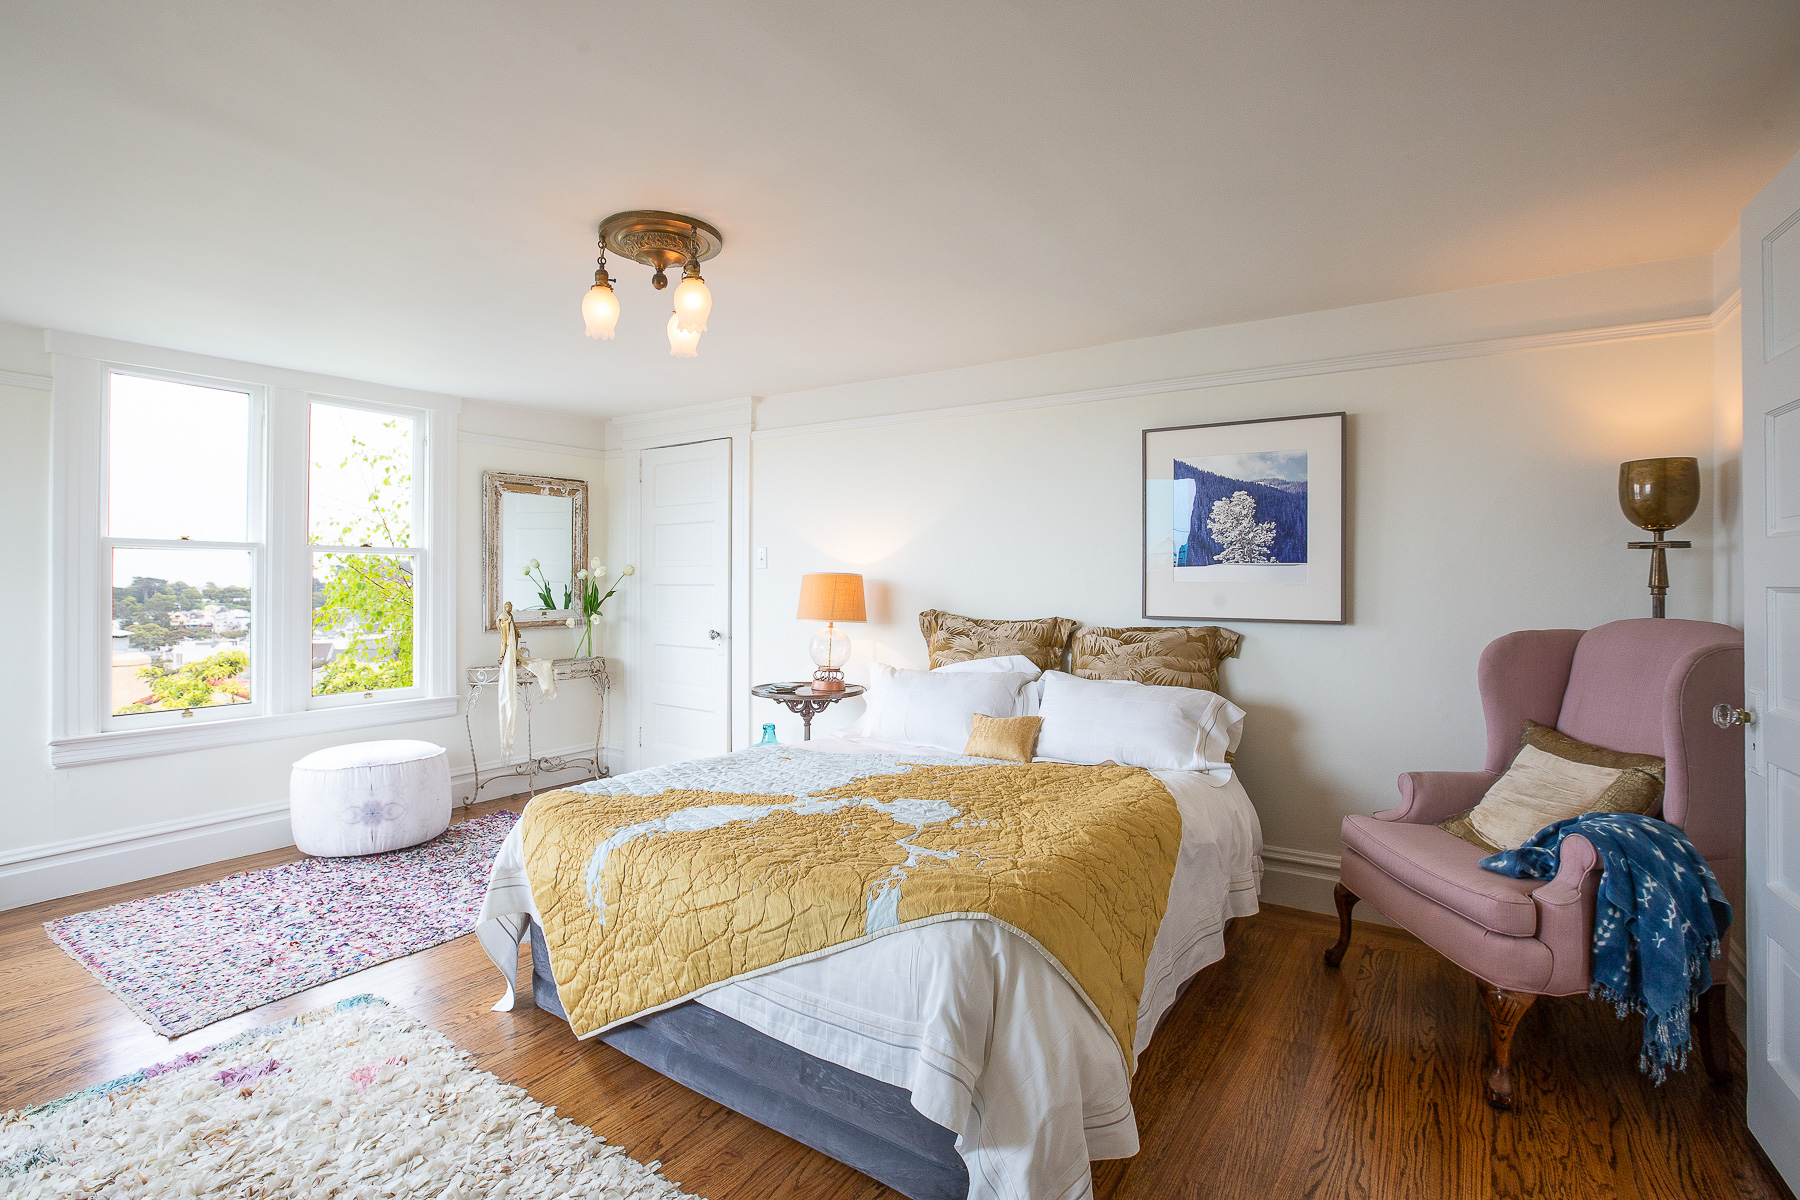 Property Photo: Bedroom with large windows and wood floor